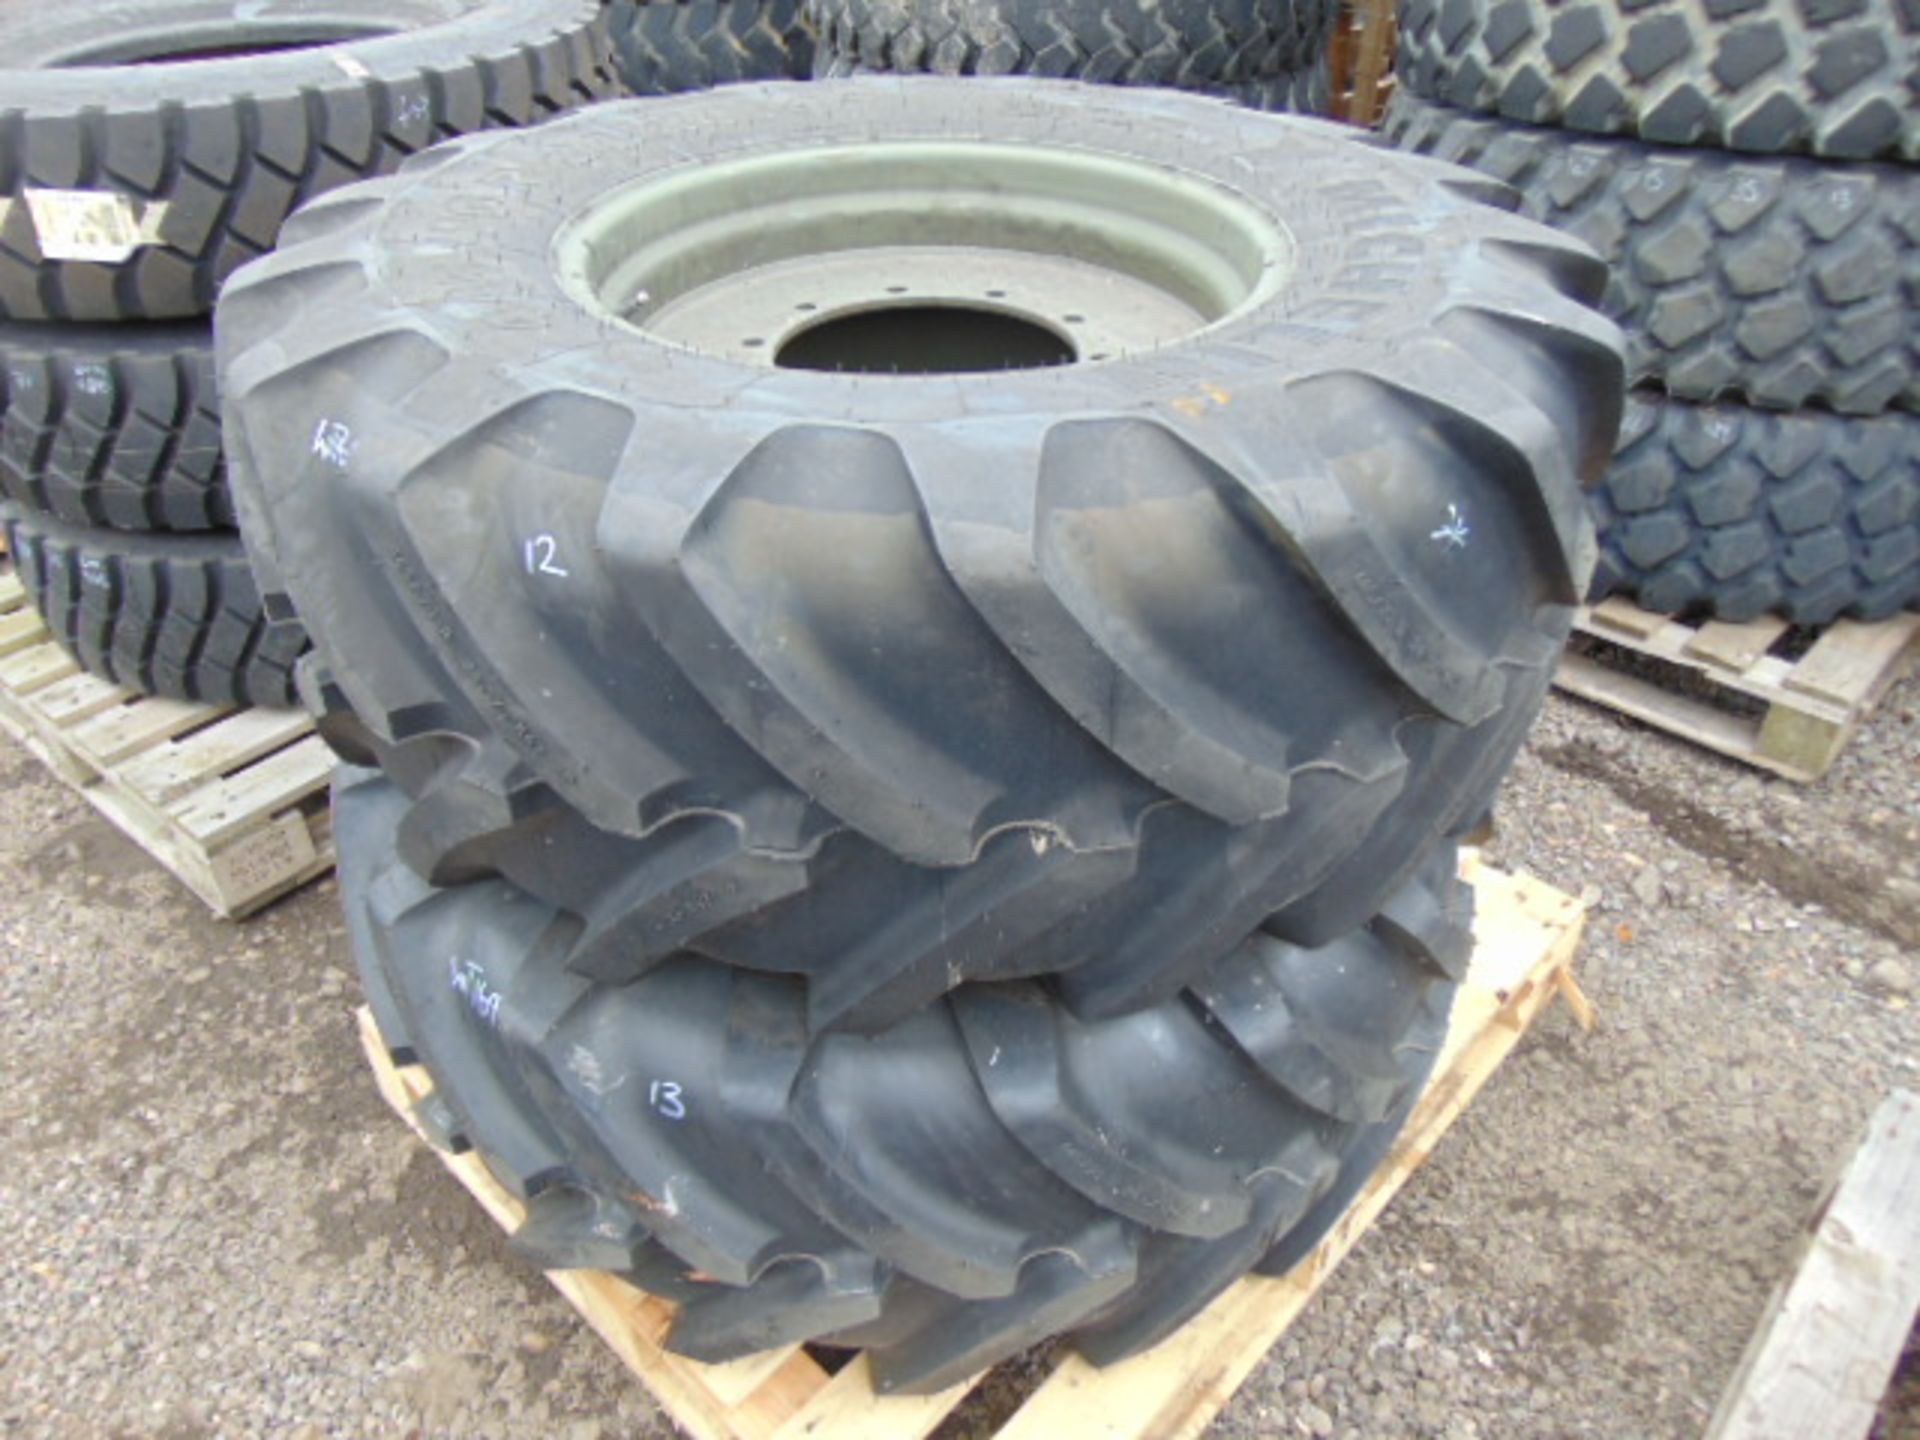 2 x Michelin 445/70 R24 XM47 Tyres with 10 stud rims